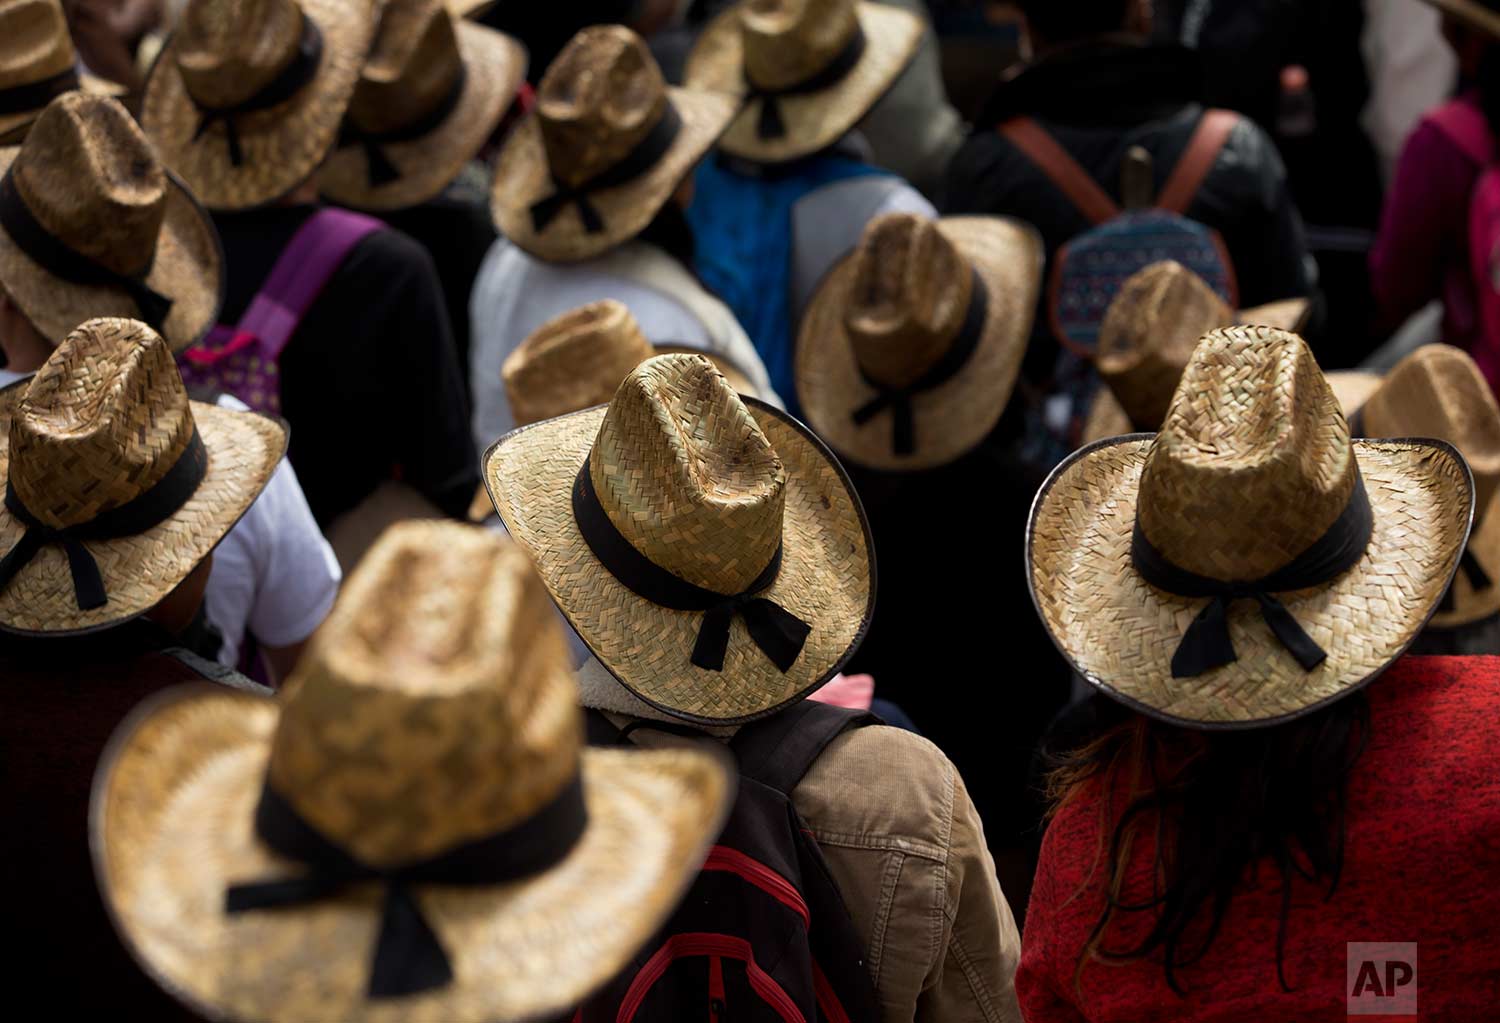 Farmers wearing straw hats take part in a march protesting the North American Free Trade Agreement in Mexico City, Wednesday, July 26, 2017. (AP Photo/Rebecca Blackwell)